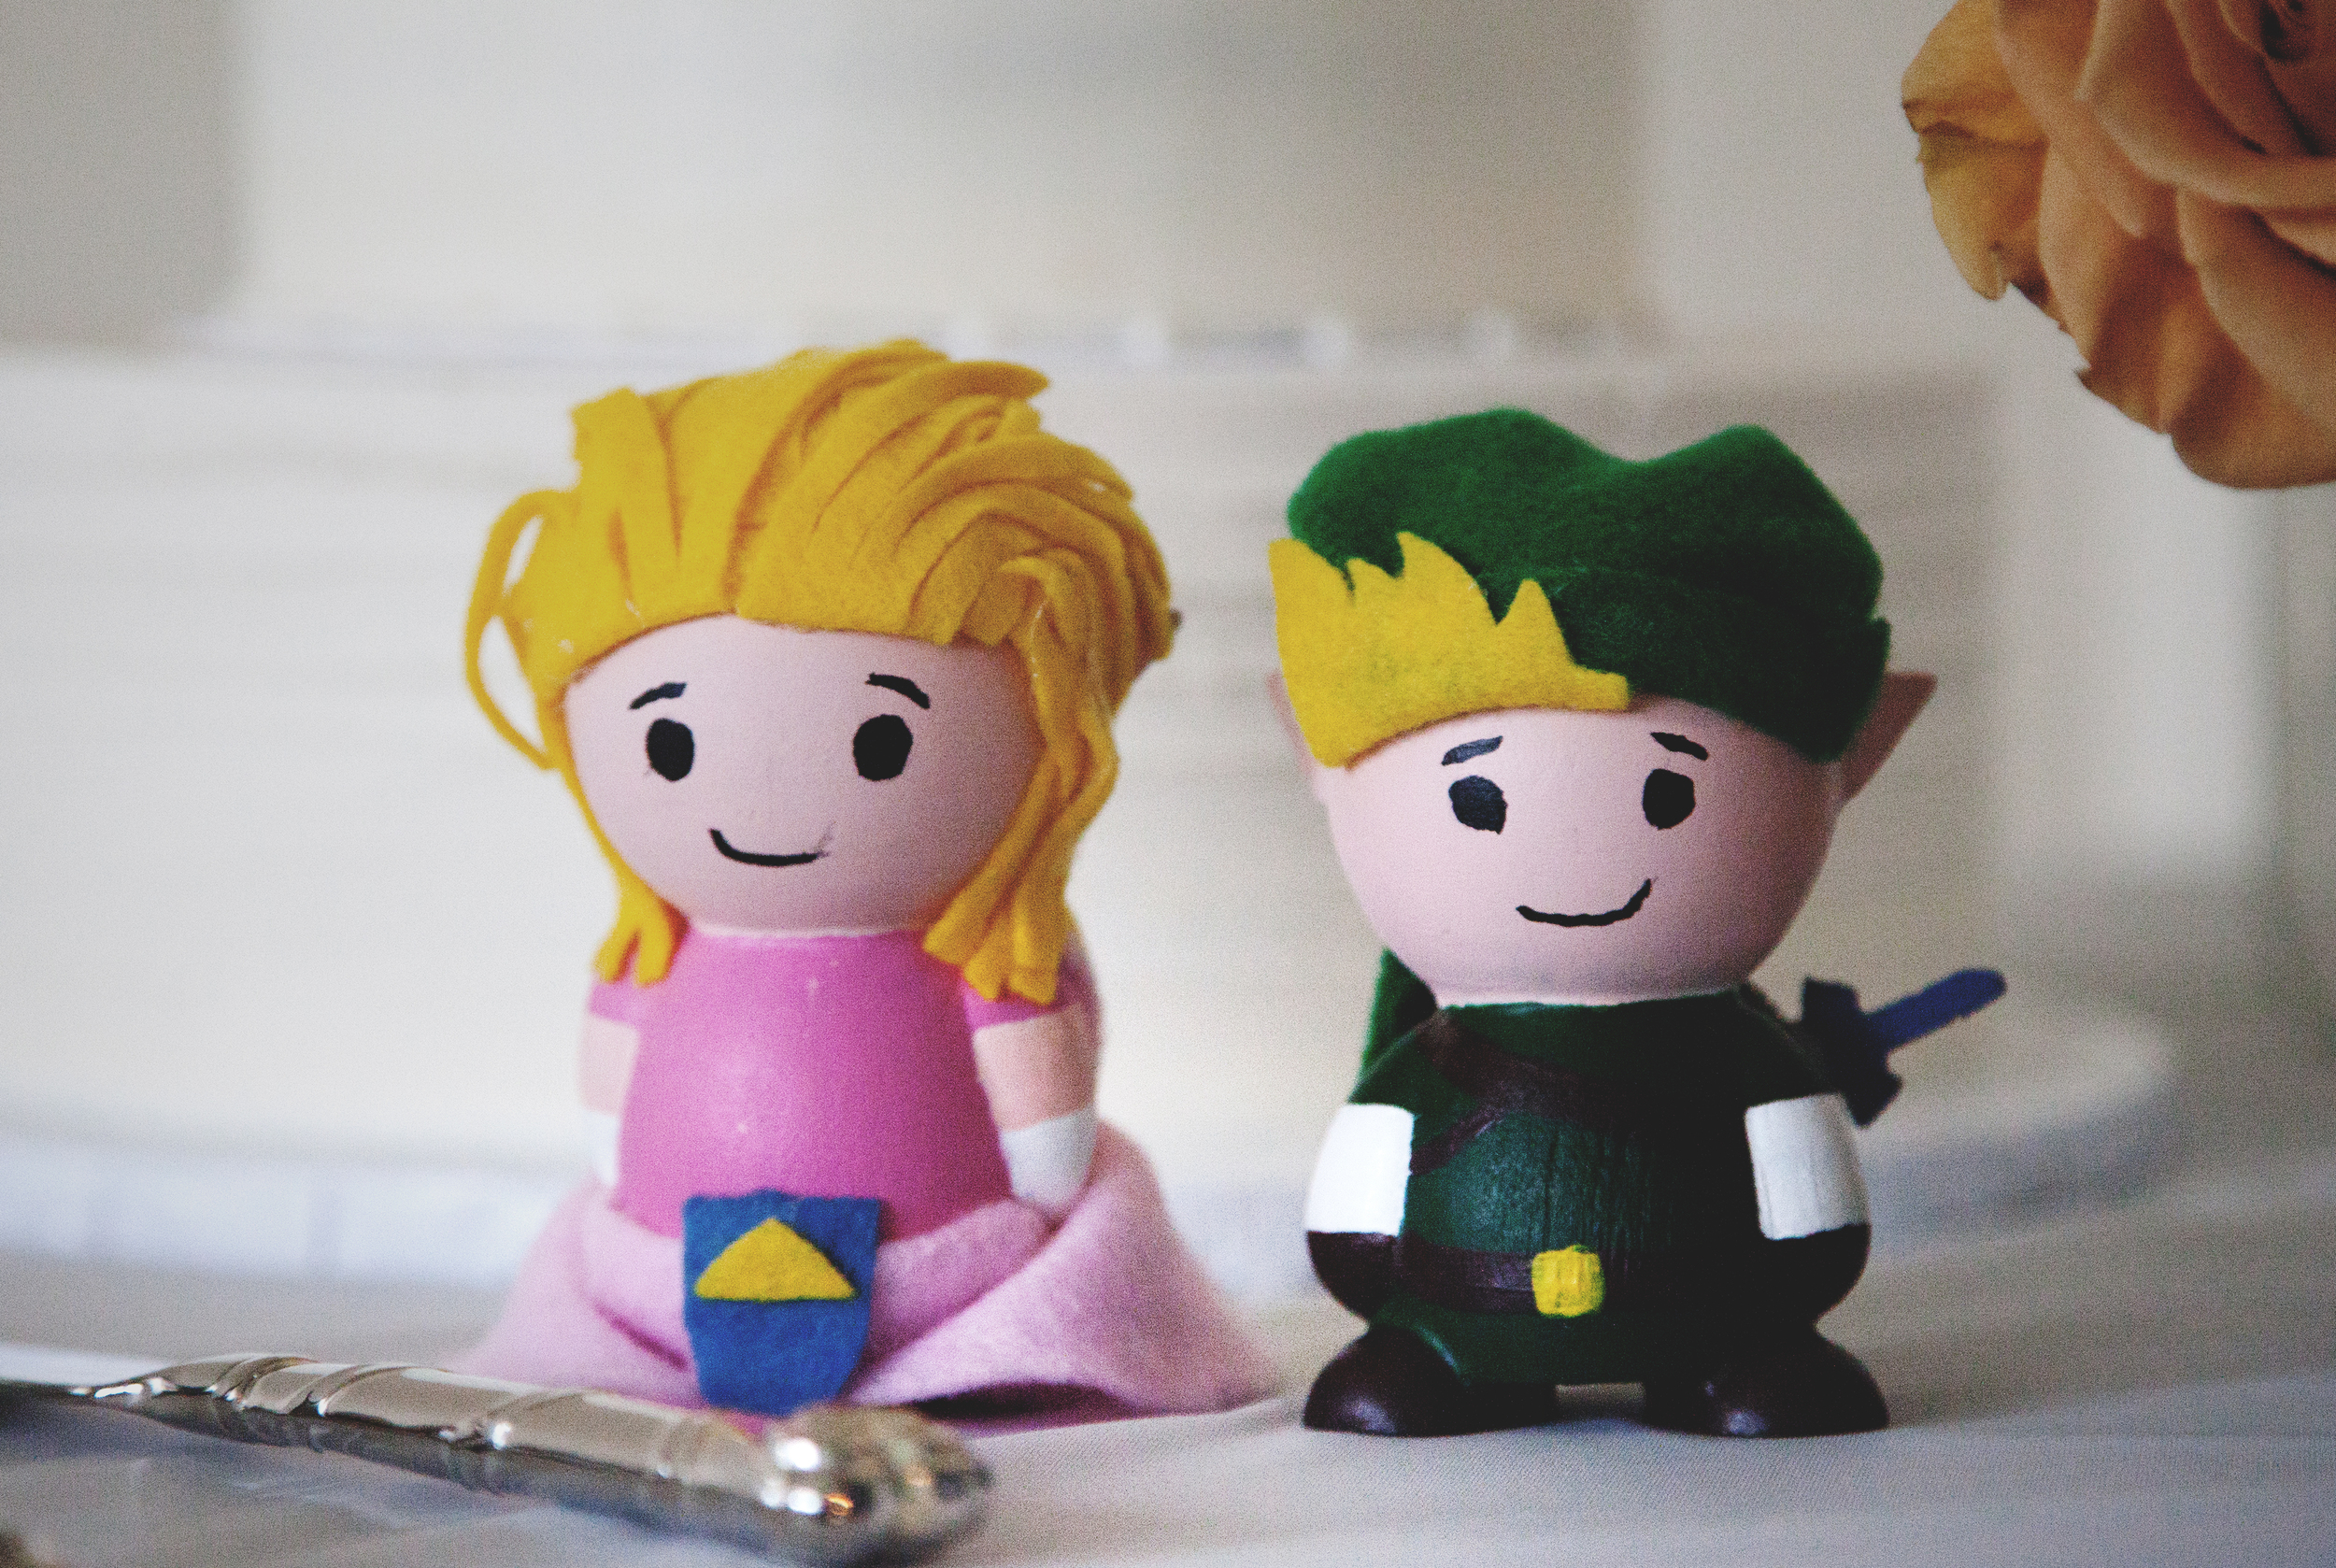  Derek's talent, our Zelda and Link cake toppers. &nbsp;Love these! 